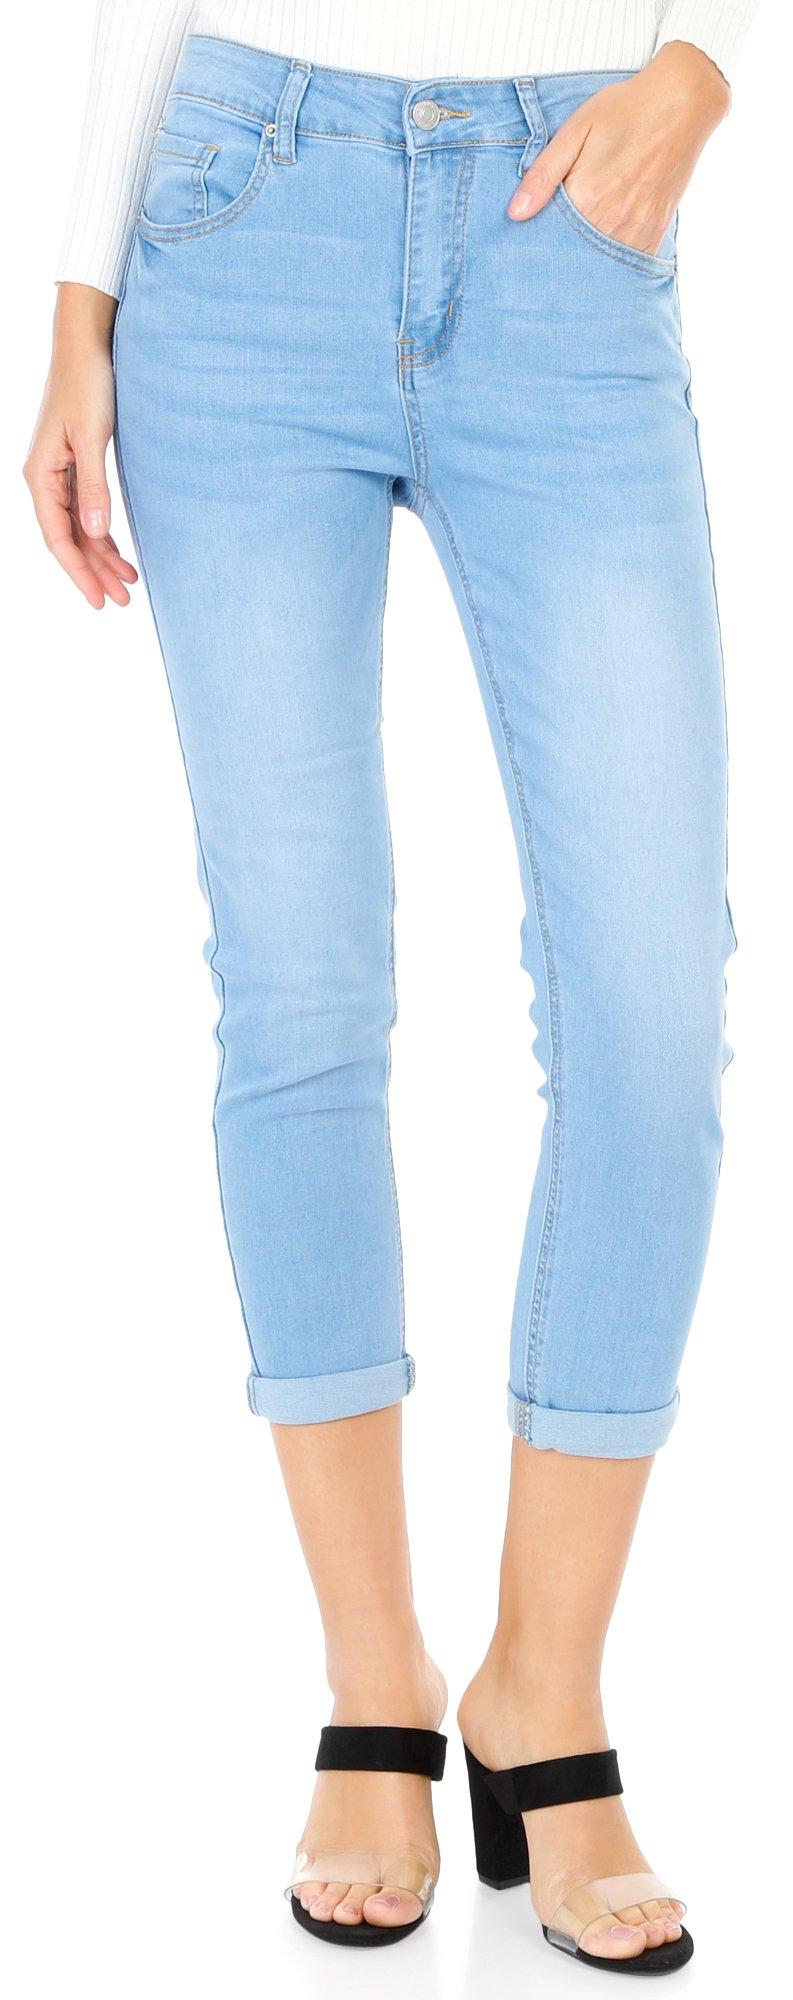 Juniors Skinny Ankle Jeans